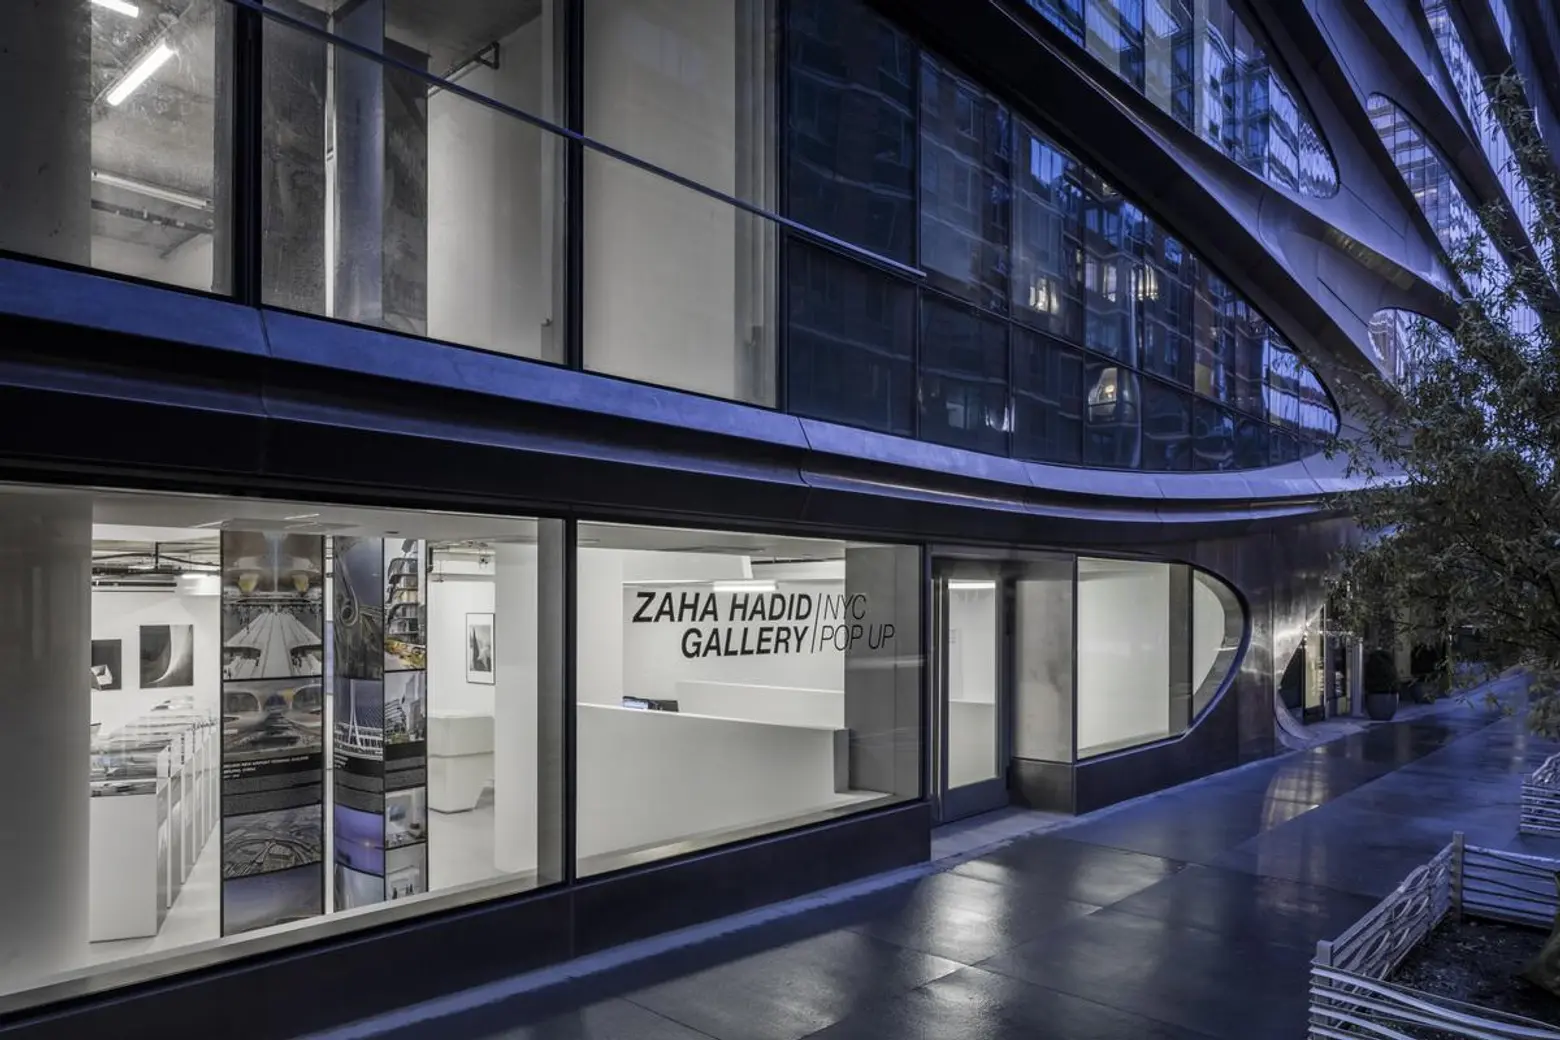 Zaha Hadid Gallery pop-up comes to the ground floor of 520 West 28th Street